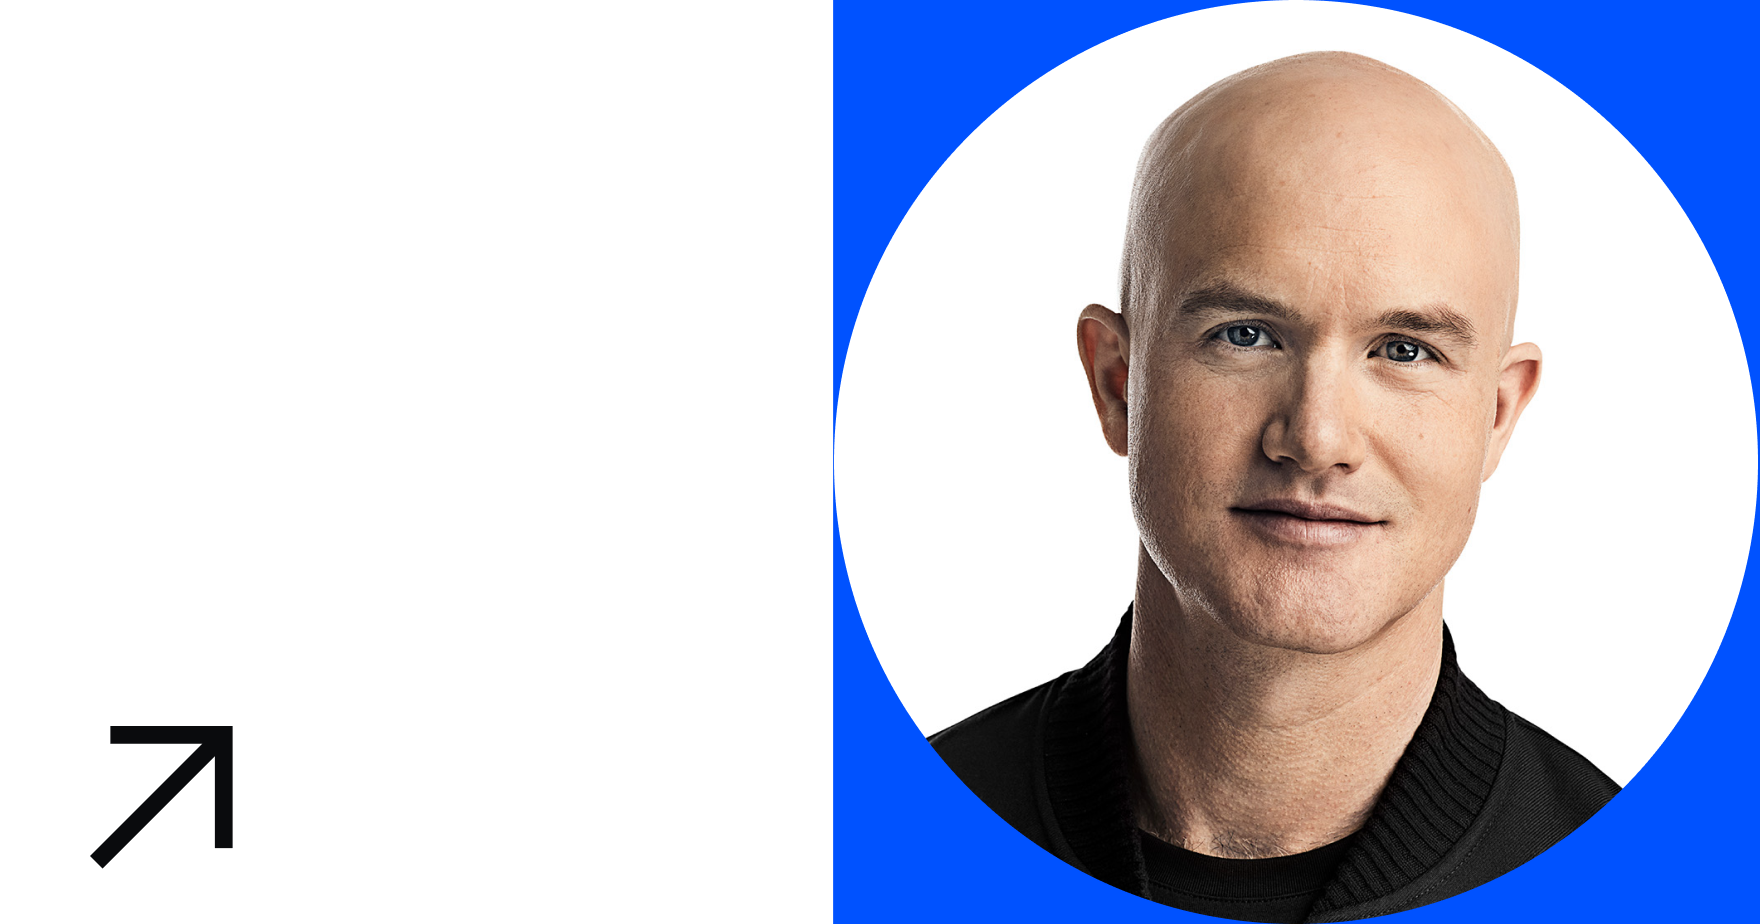 A message from Coinbase CEO and Cofounder, Brian Armstrong